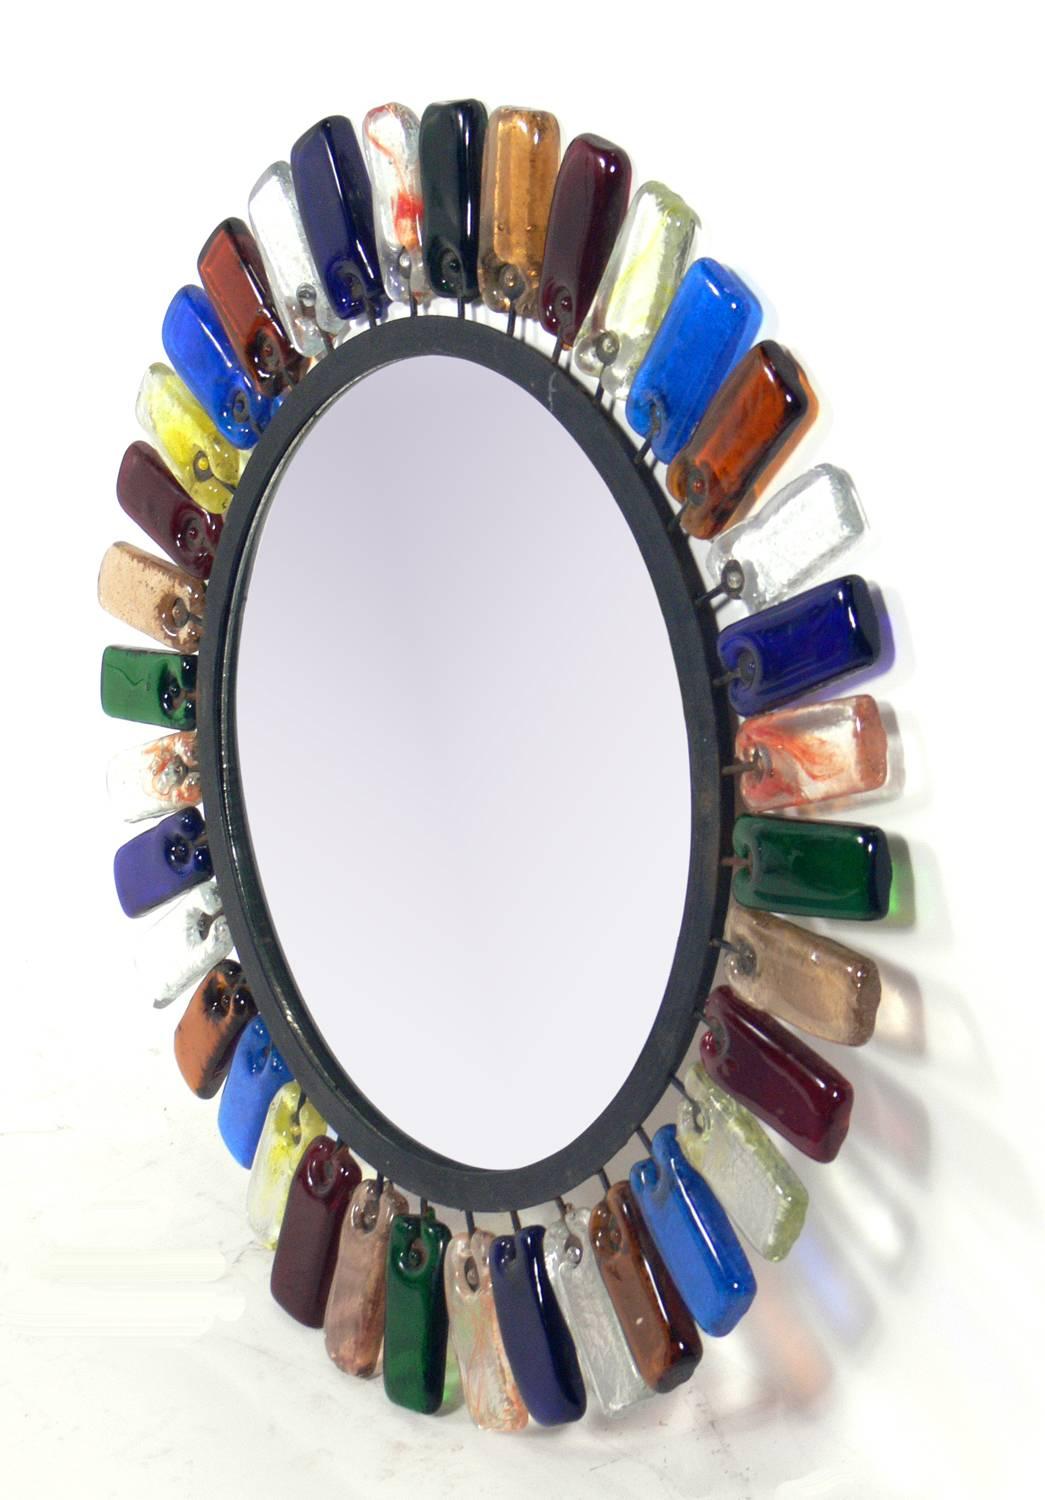 Colorful handmade glass and iron mirror attributed to Feders, Mexico, circa 1960s. This mirror would look great anywhere you need a graphic pop of color!